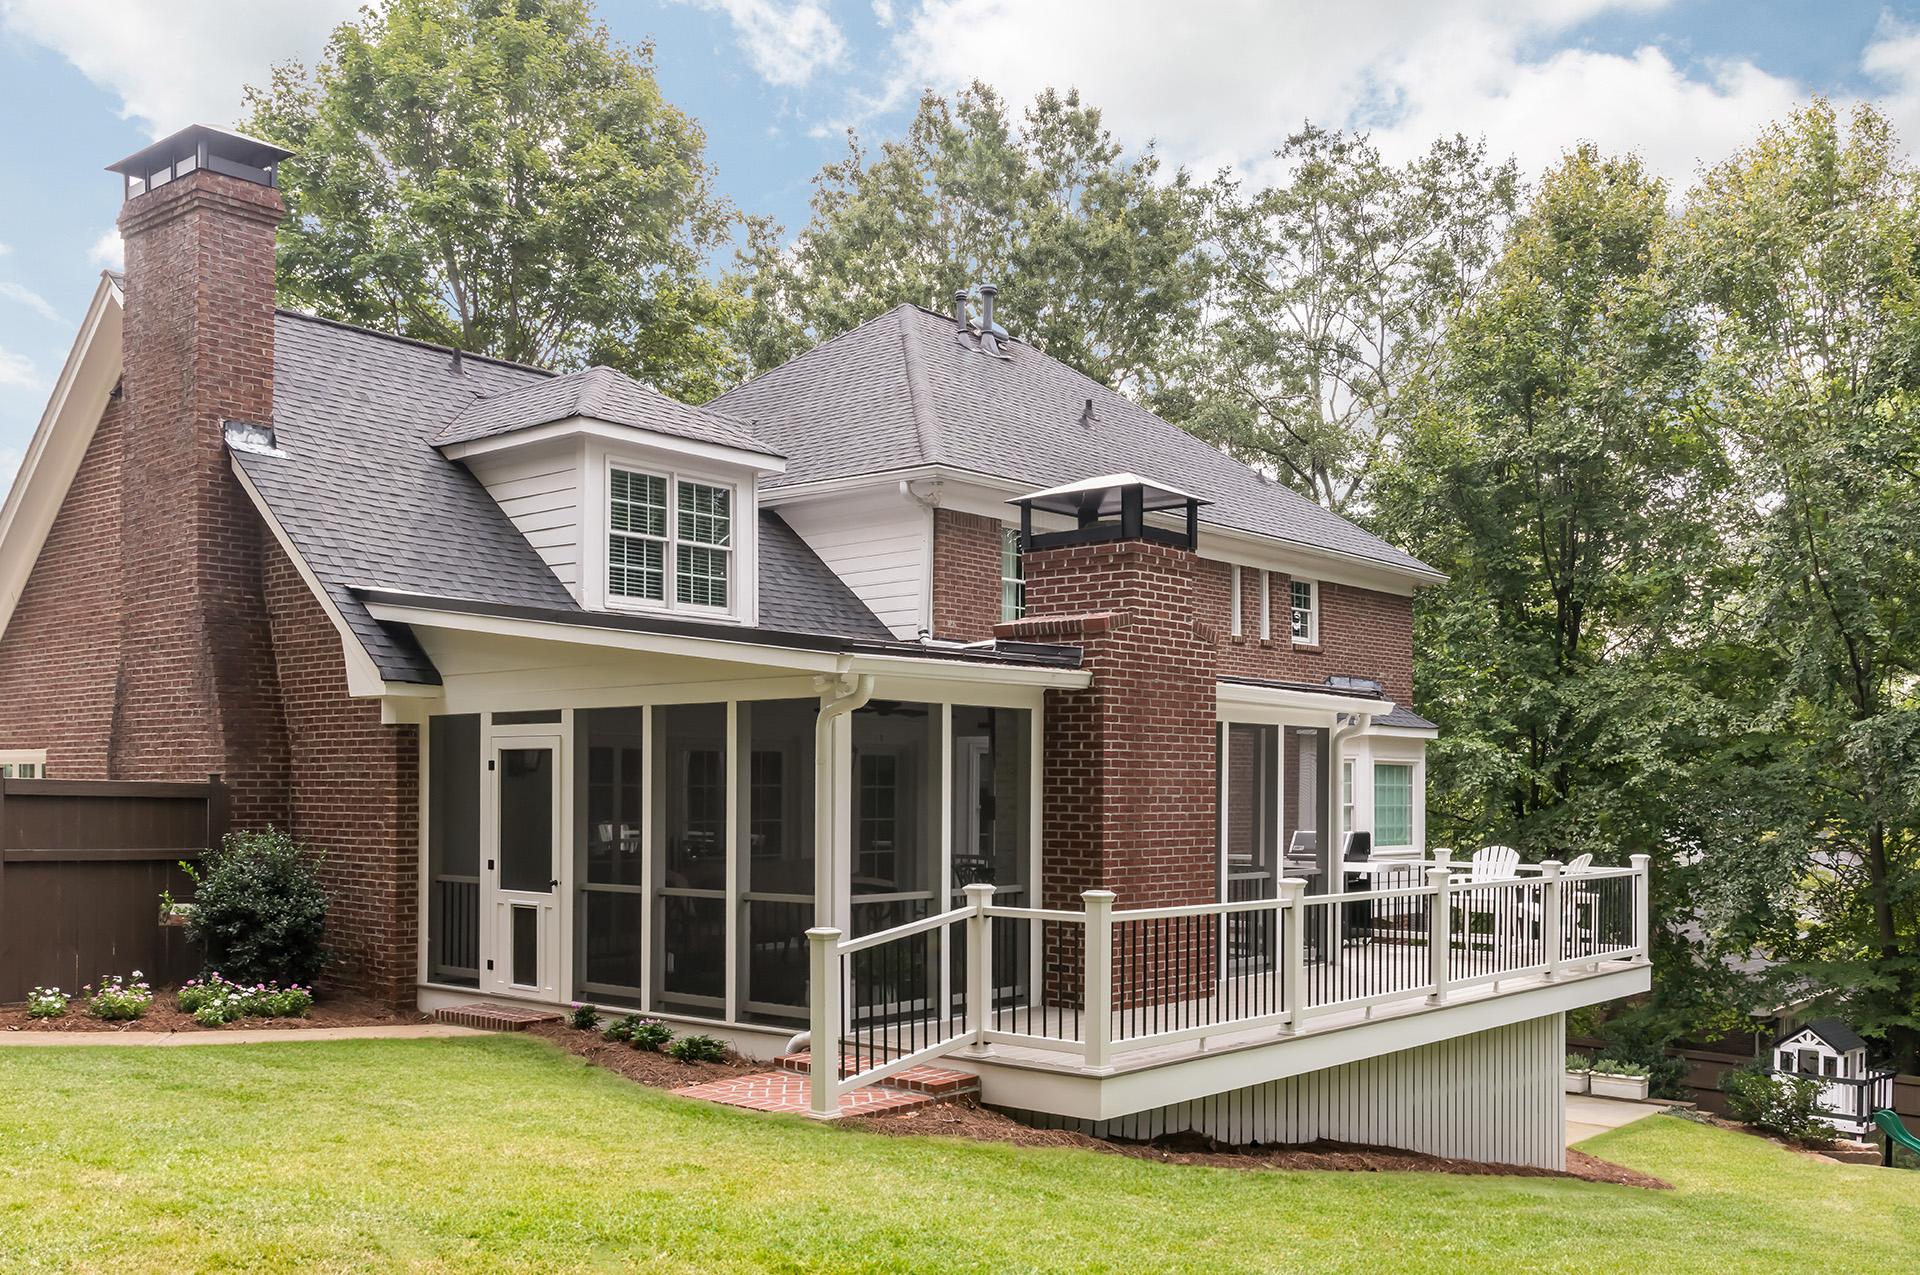 A newly remodeled home with screened porch addition